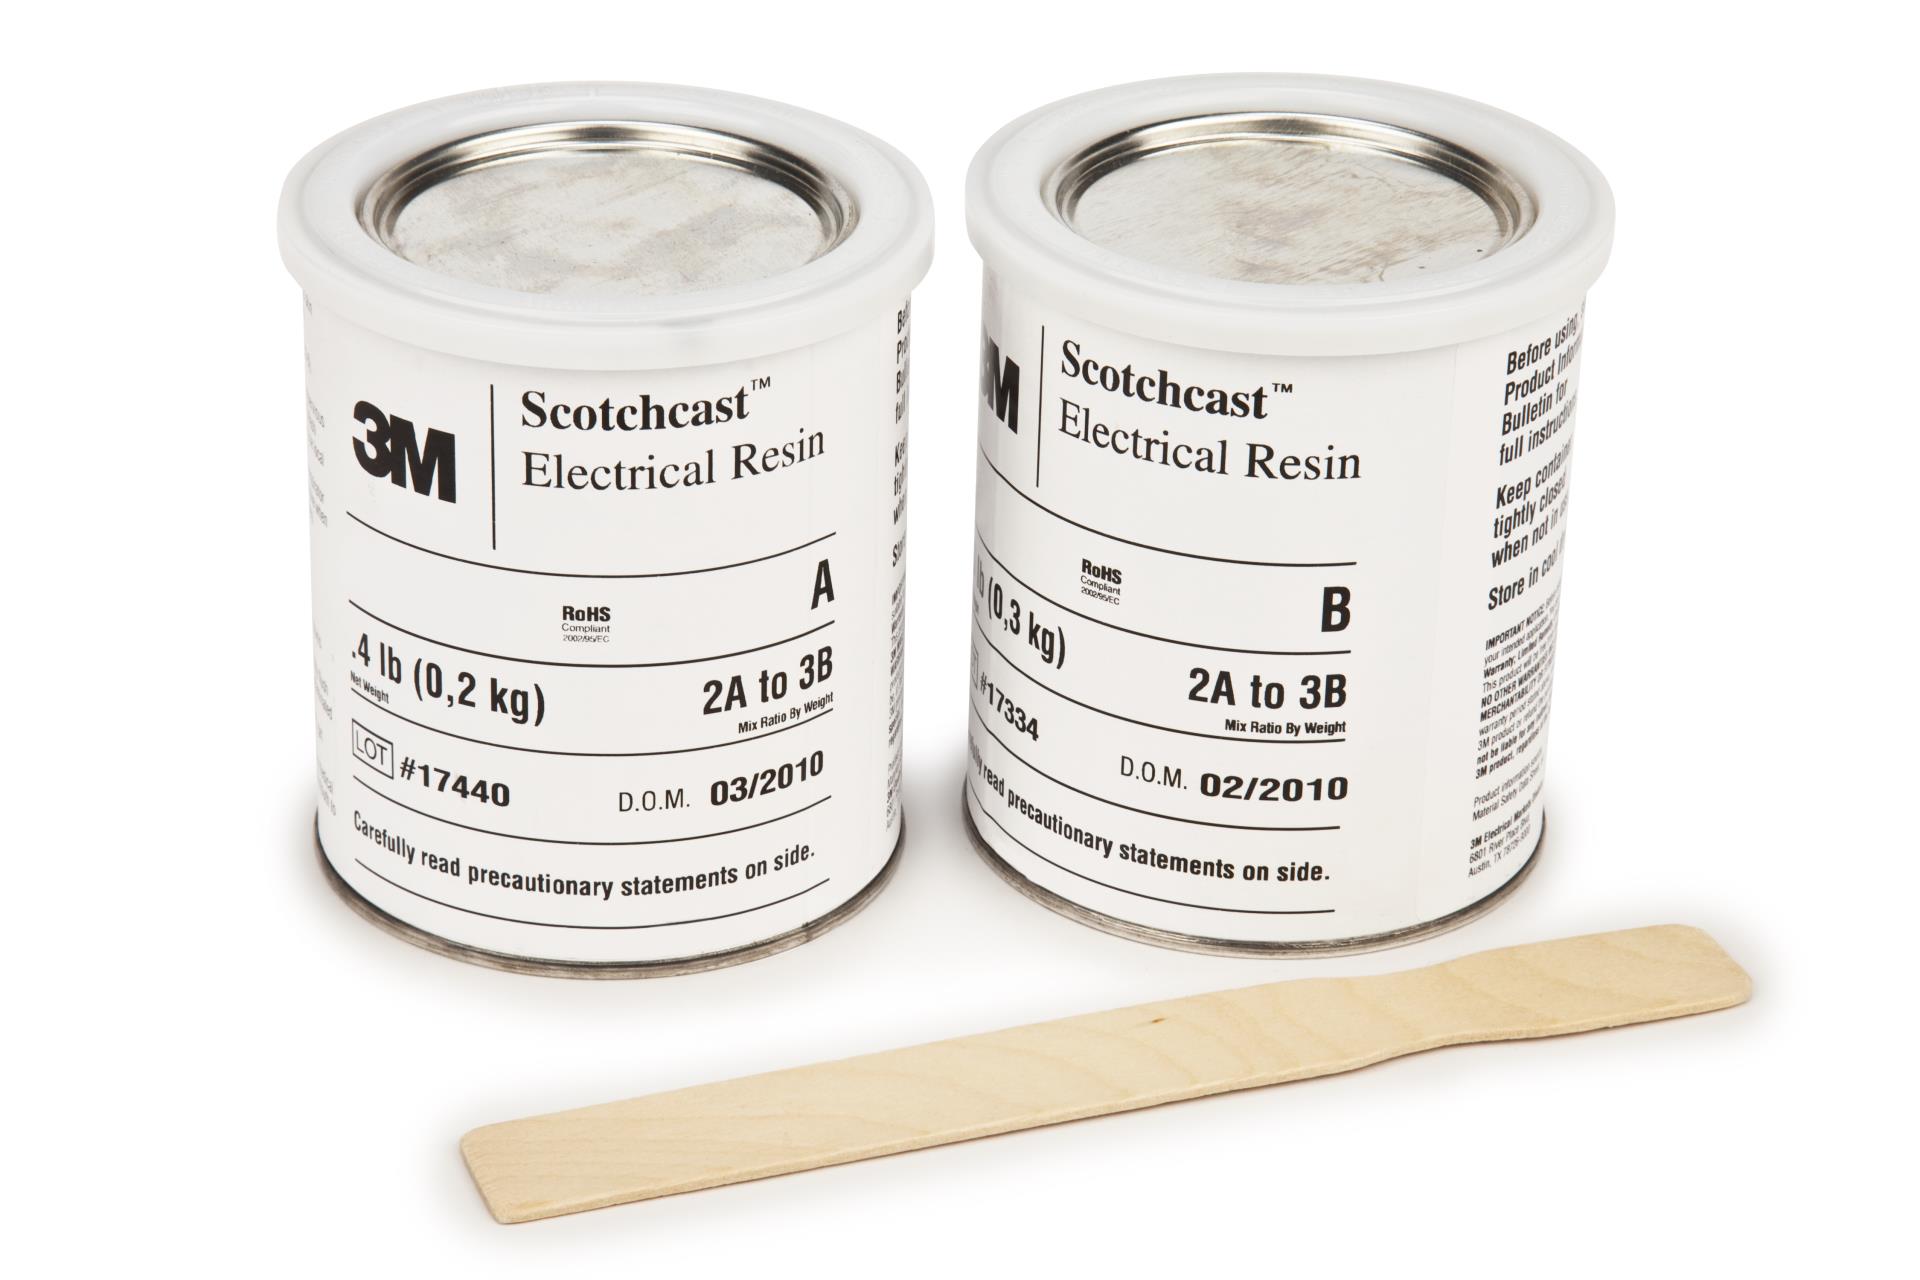 3M™ Scotchcast™ Electrical Resin 9N, 16 1# units case Aircraft  9394339